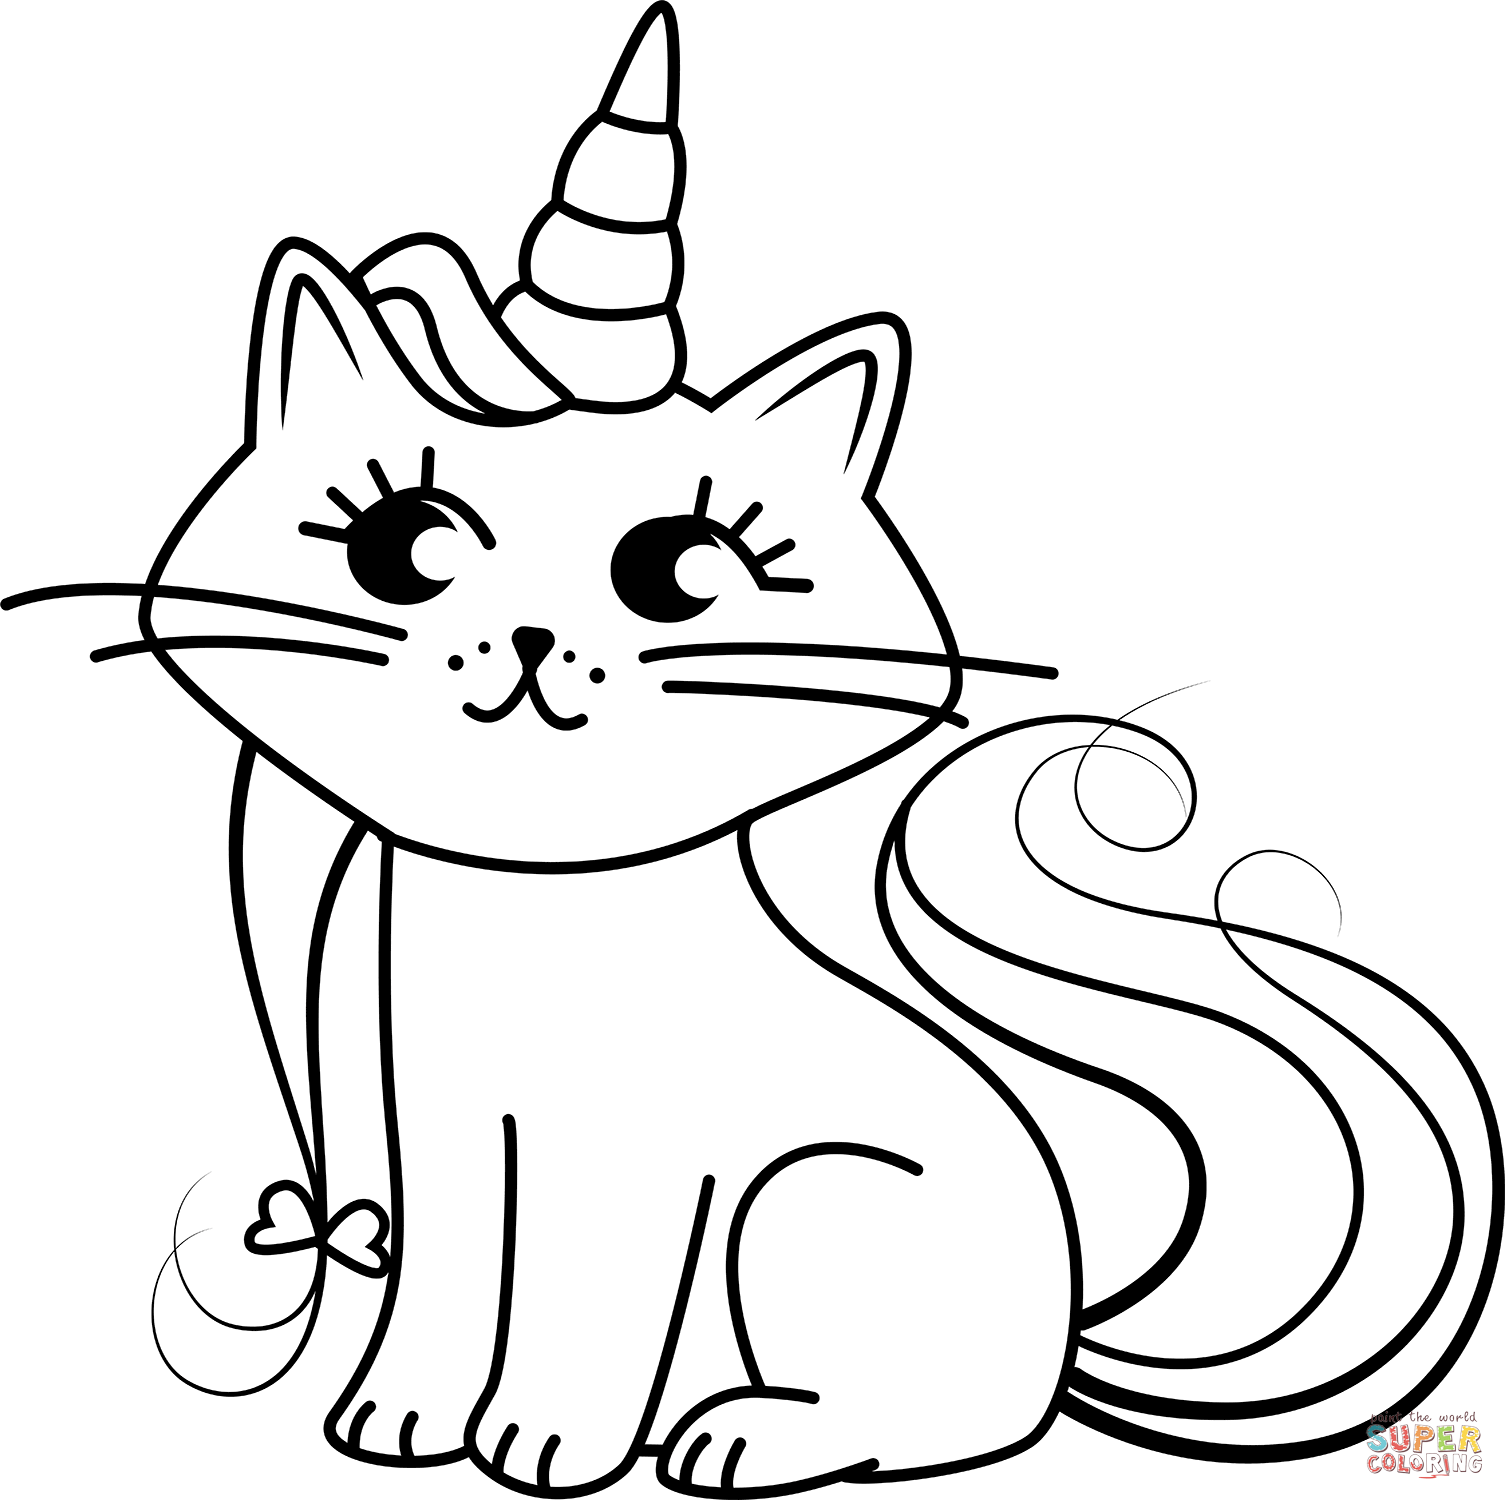 Unicorn Cat coloring page | Free Printable Coloring Pages